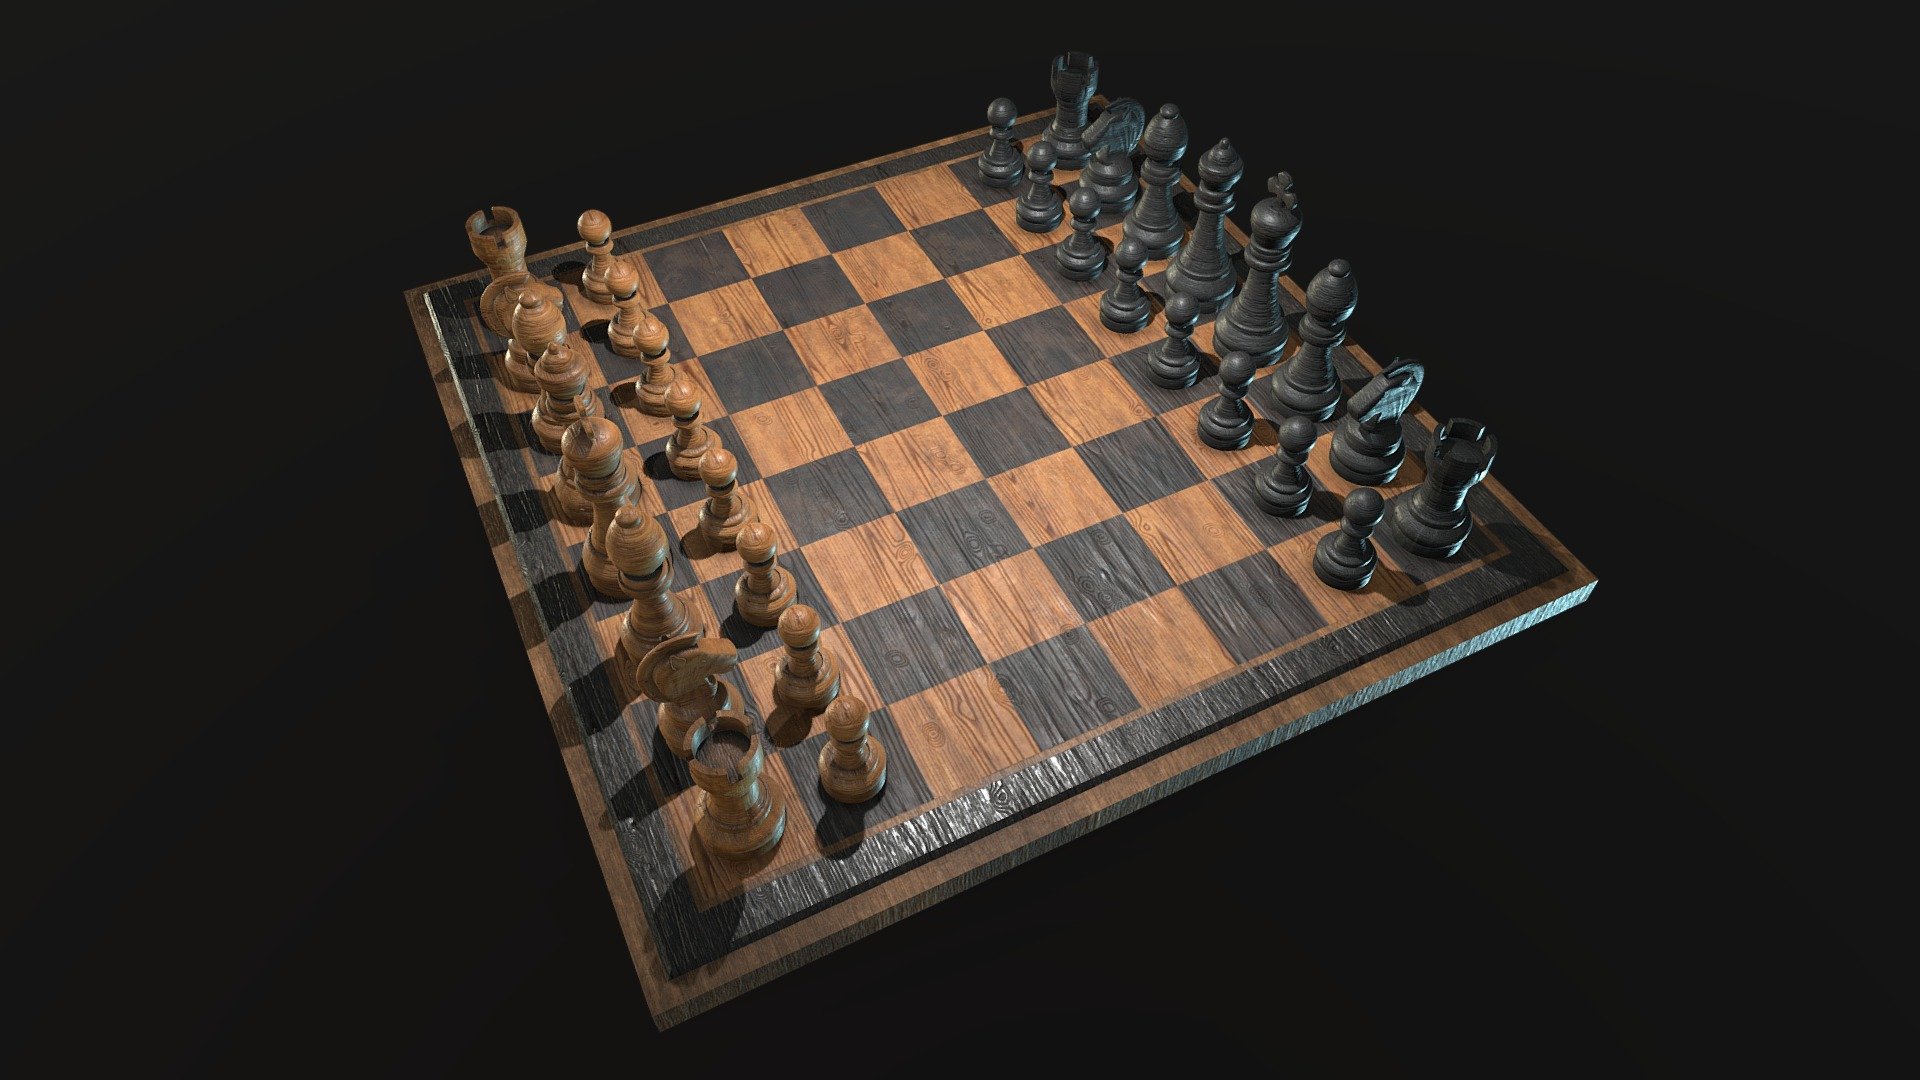 Wooden chess made in low poly with PBR high resolution textures.
3 UV maps, 15 textures /  4K.
Game ready low poly chess full set 3d model 3d model